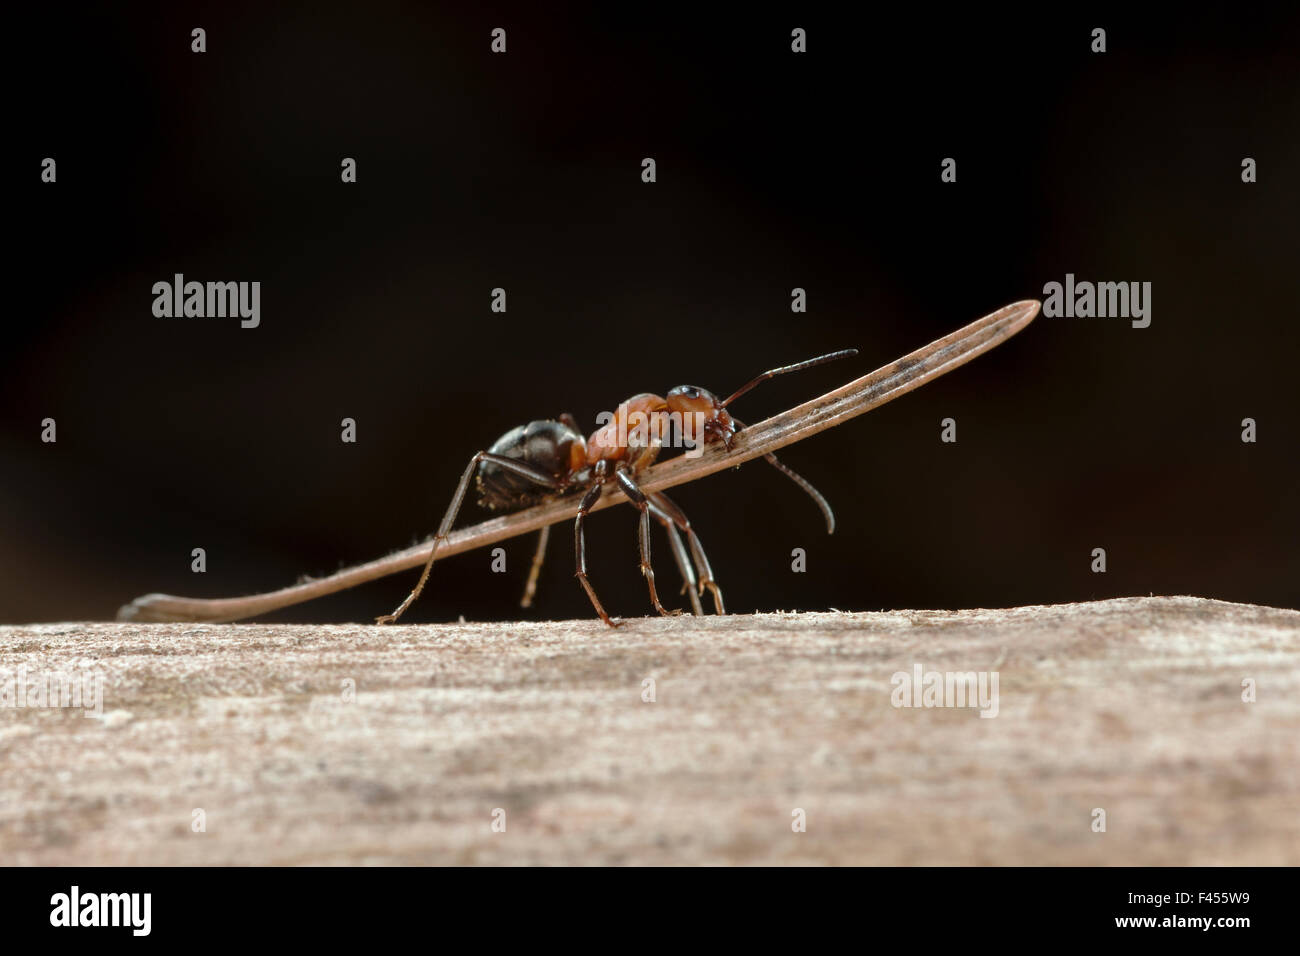 Red wood ant (Formica rufa) carrying construction material to anthill (fir needle), Germany. Stock Photo